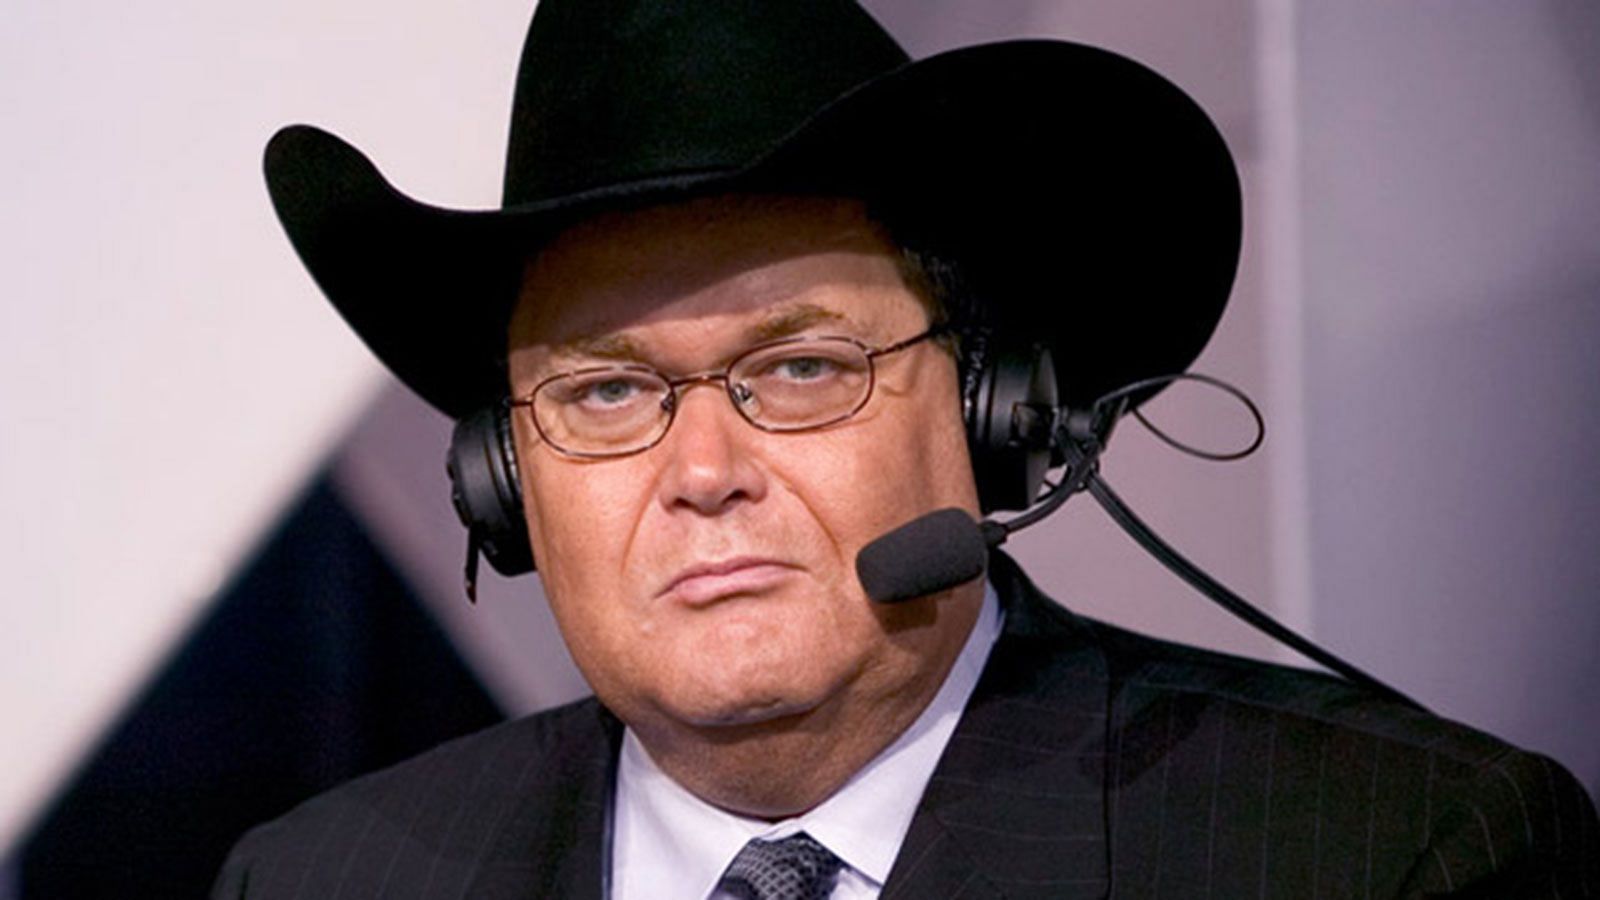 Jim Ross is a legend of the wrestling business.